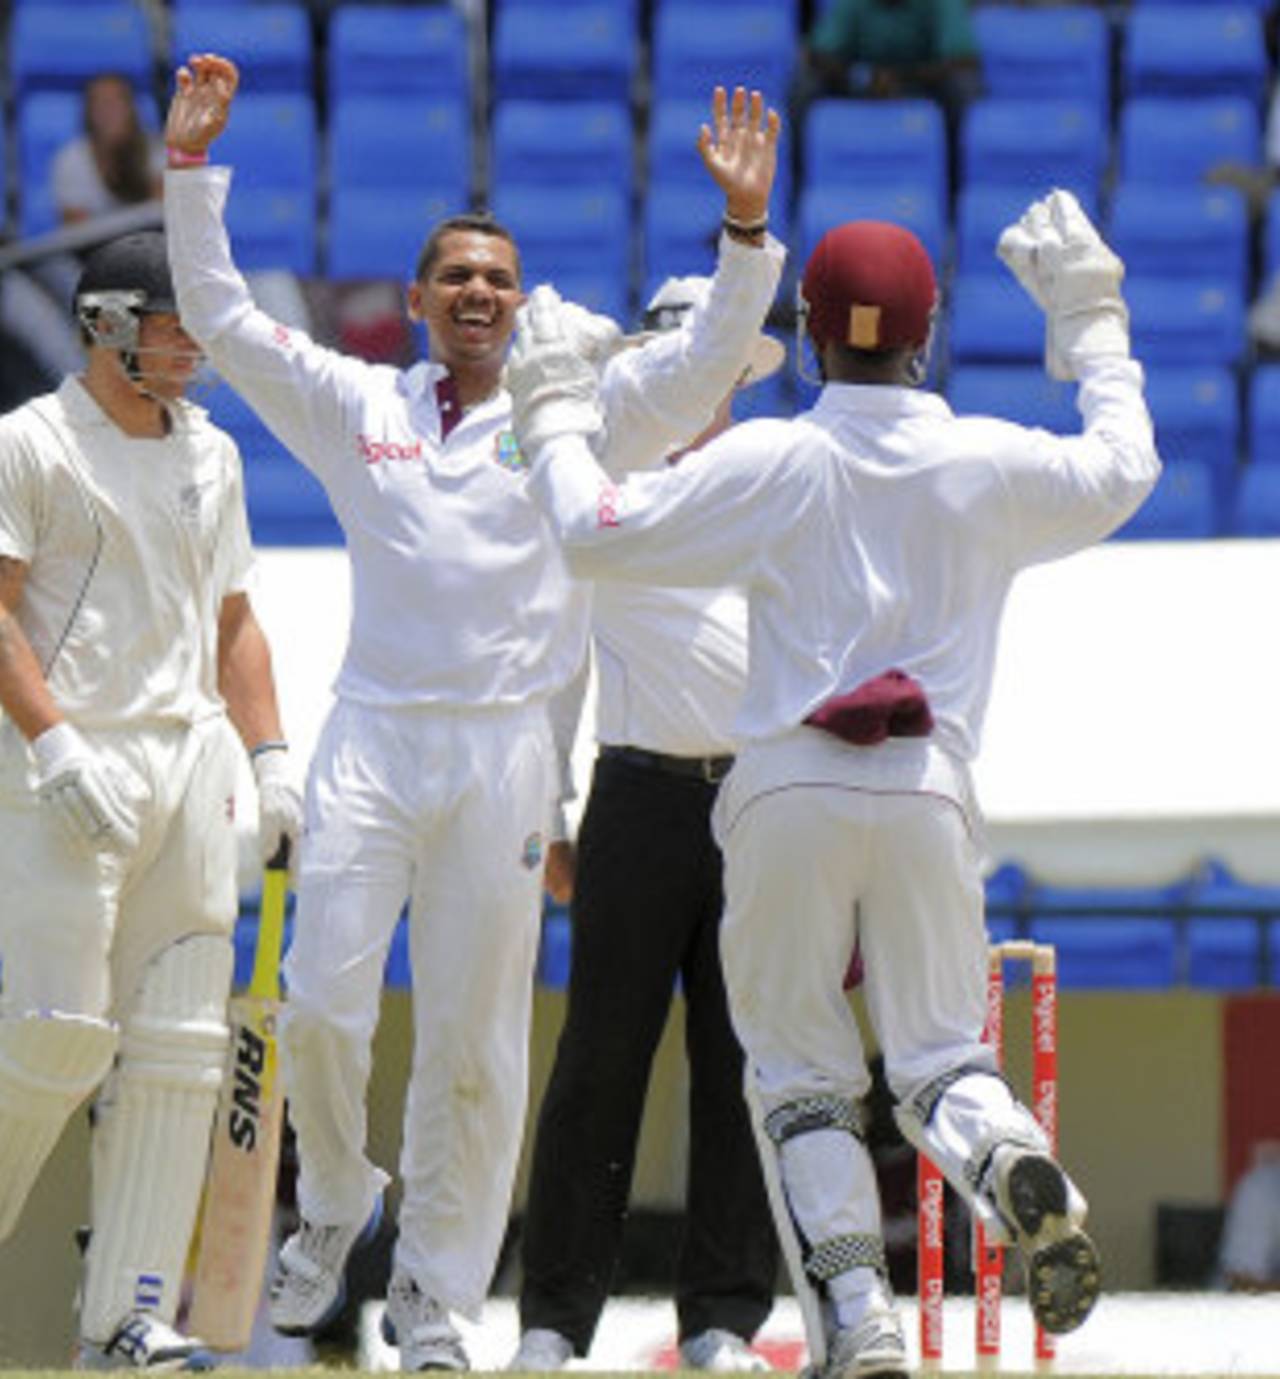 Sunil Narine celebrates his first five-wicket haul in Tests, West Indies v New Zealand, 1st Test, Antigua, 2nd day, July 26, 2012